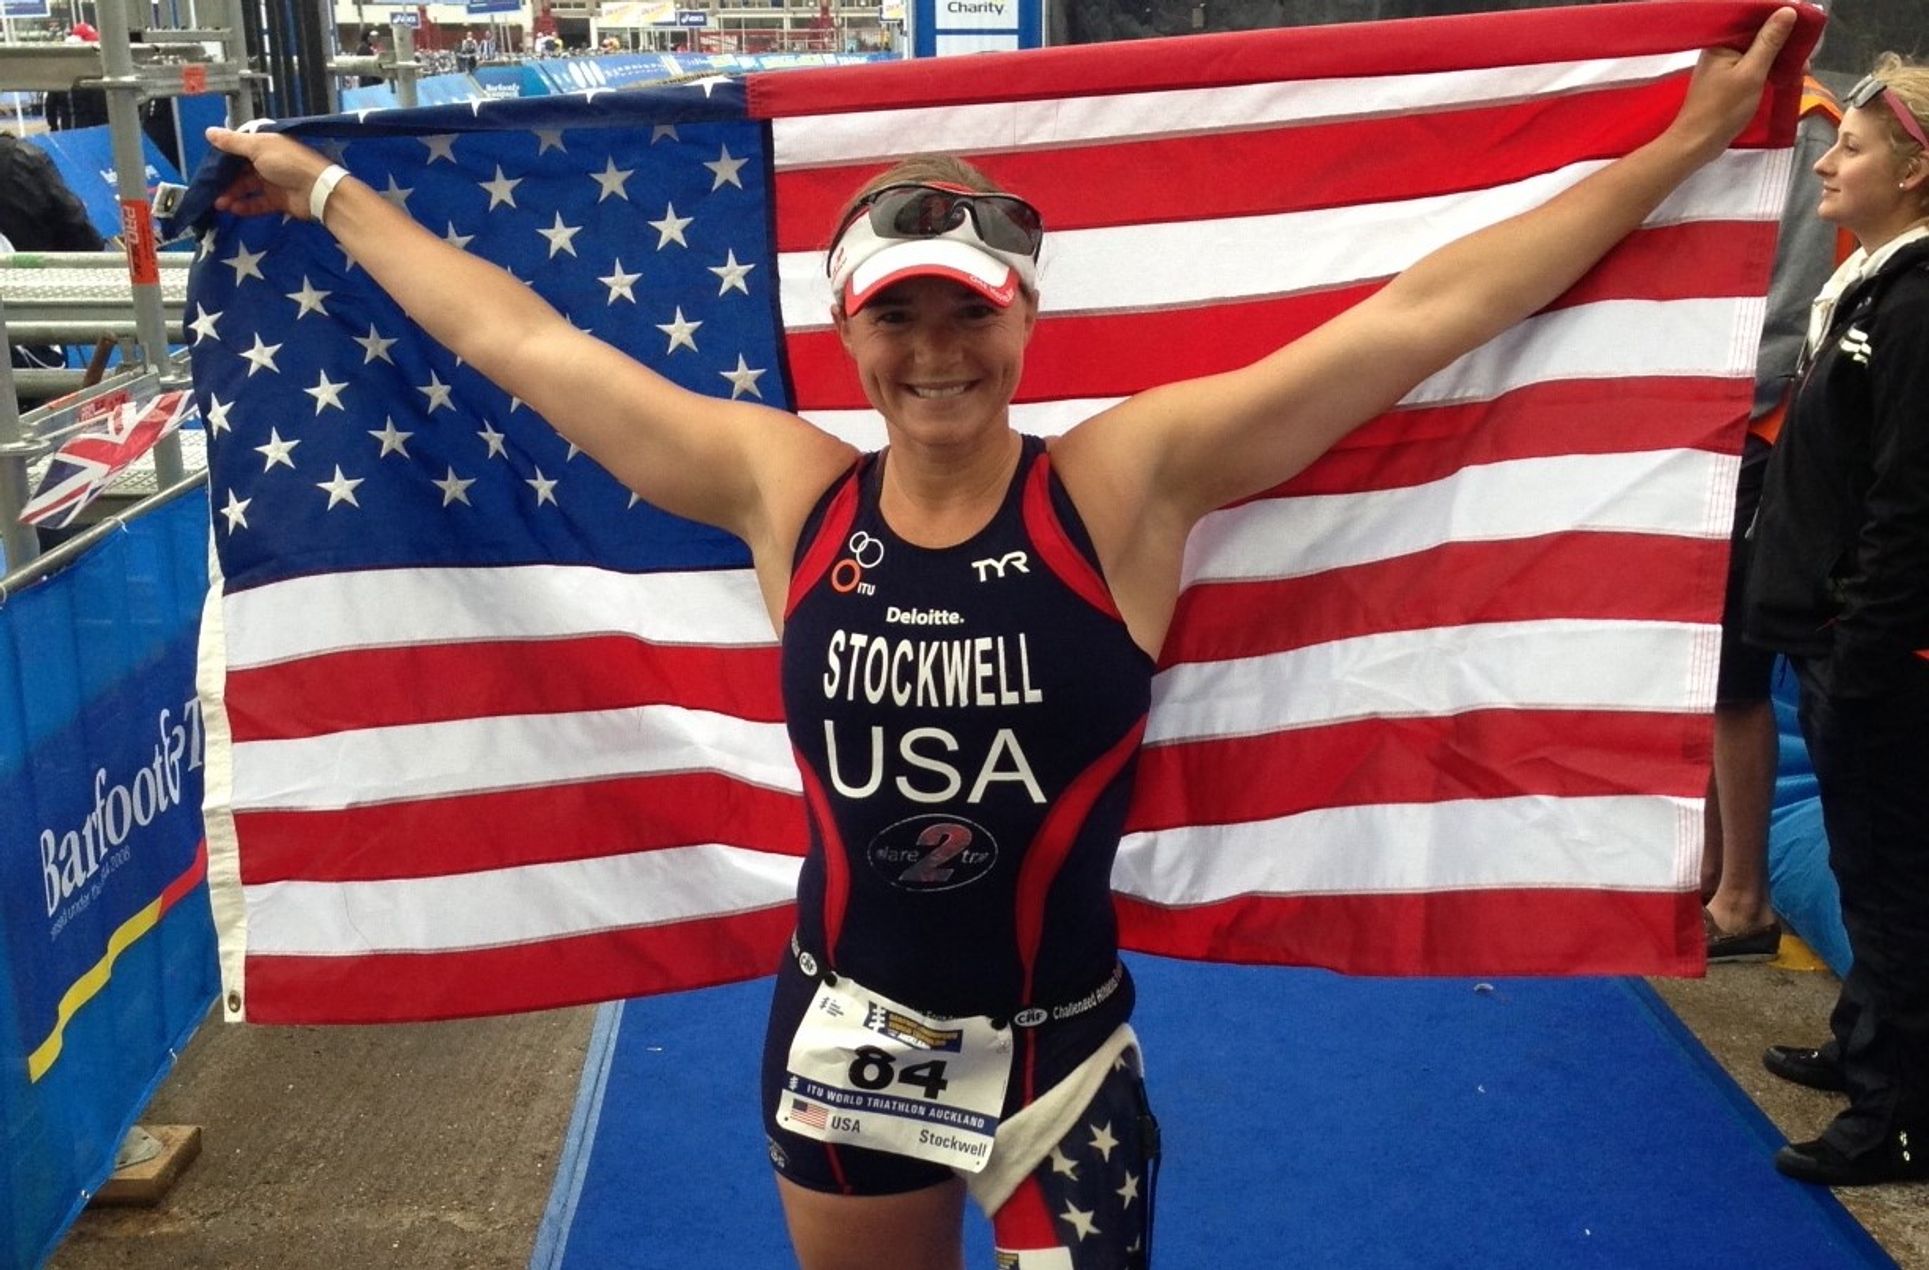 Triumphantly united: Cornerstone joins forces with Paralympic luminary Melissa Stockwell